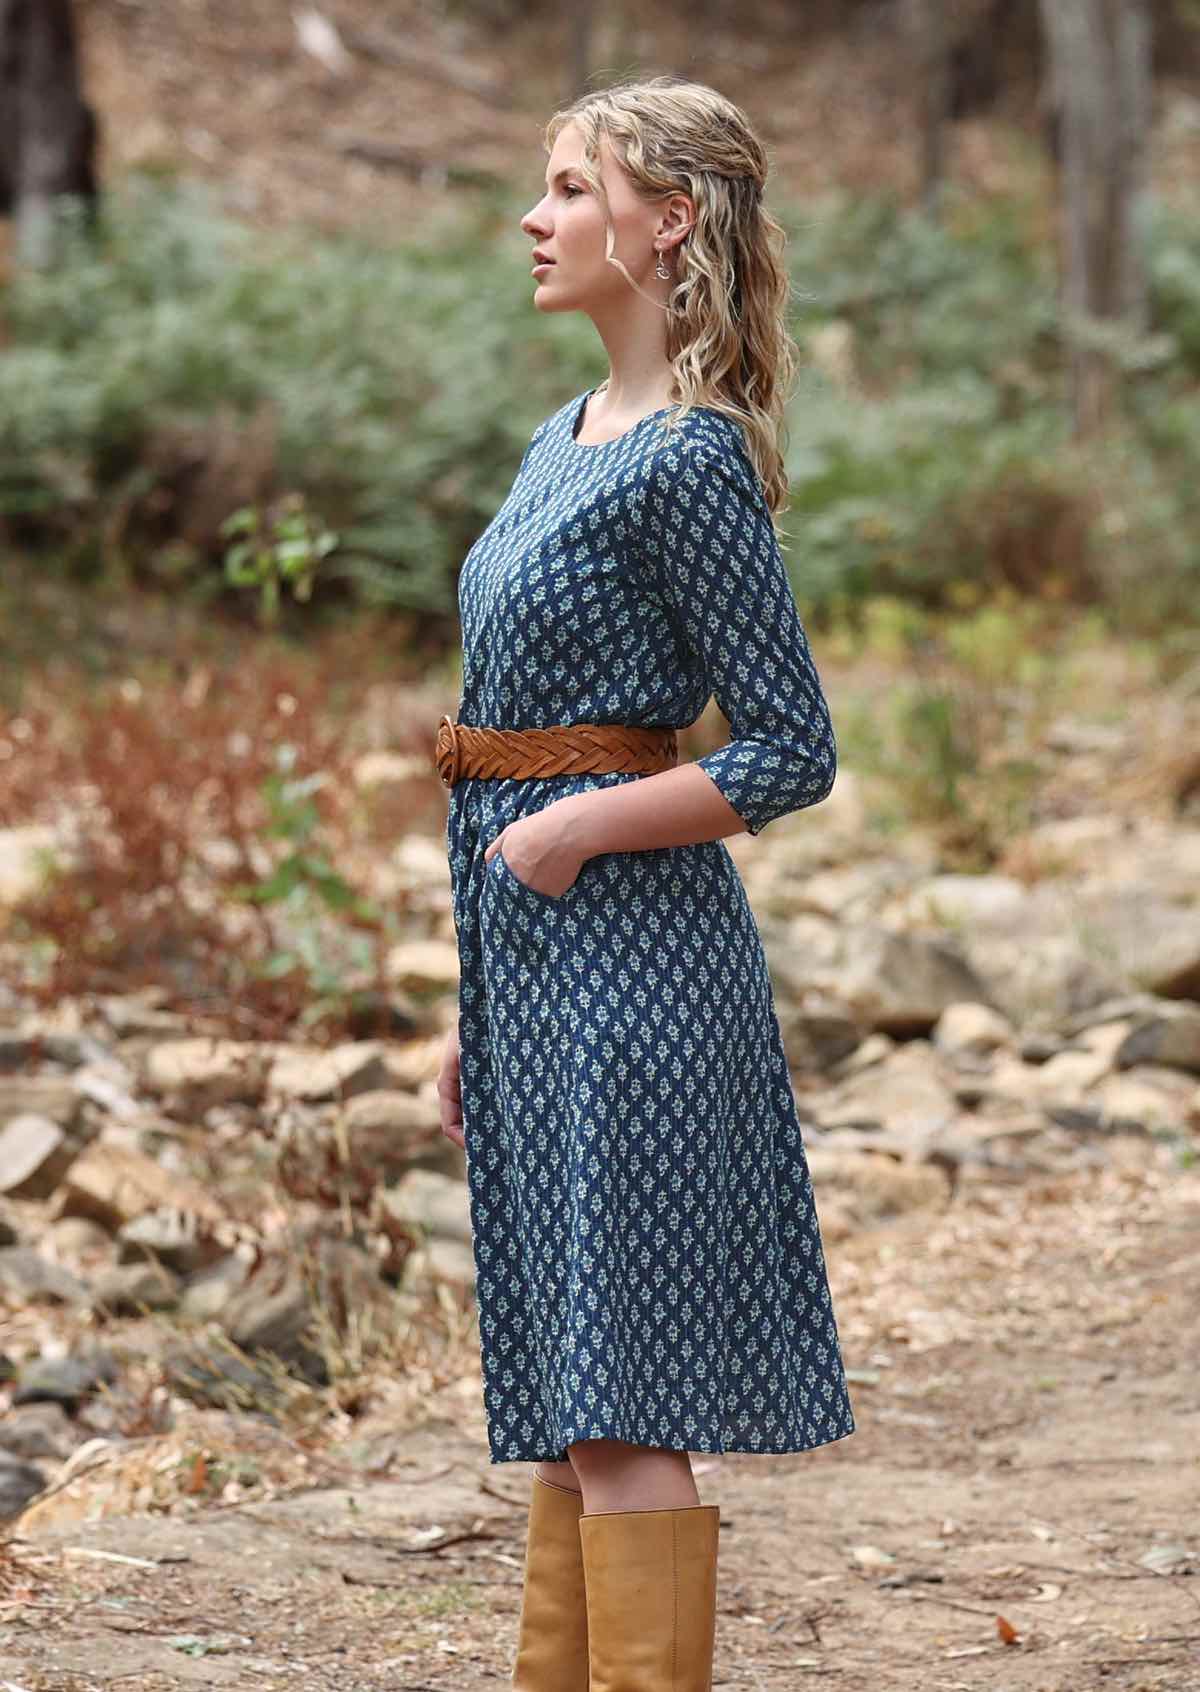 Add a belt to this cotton dress to cinch the waist in